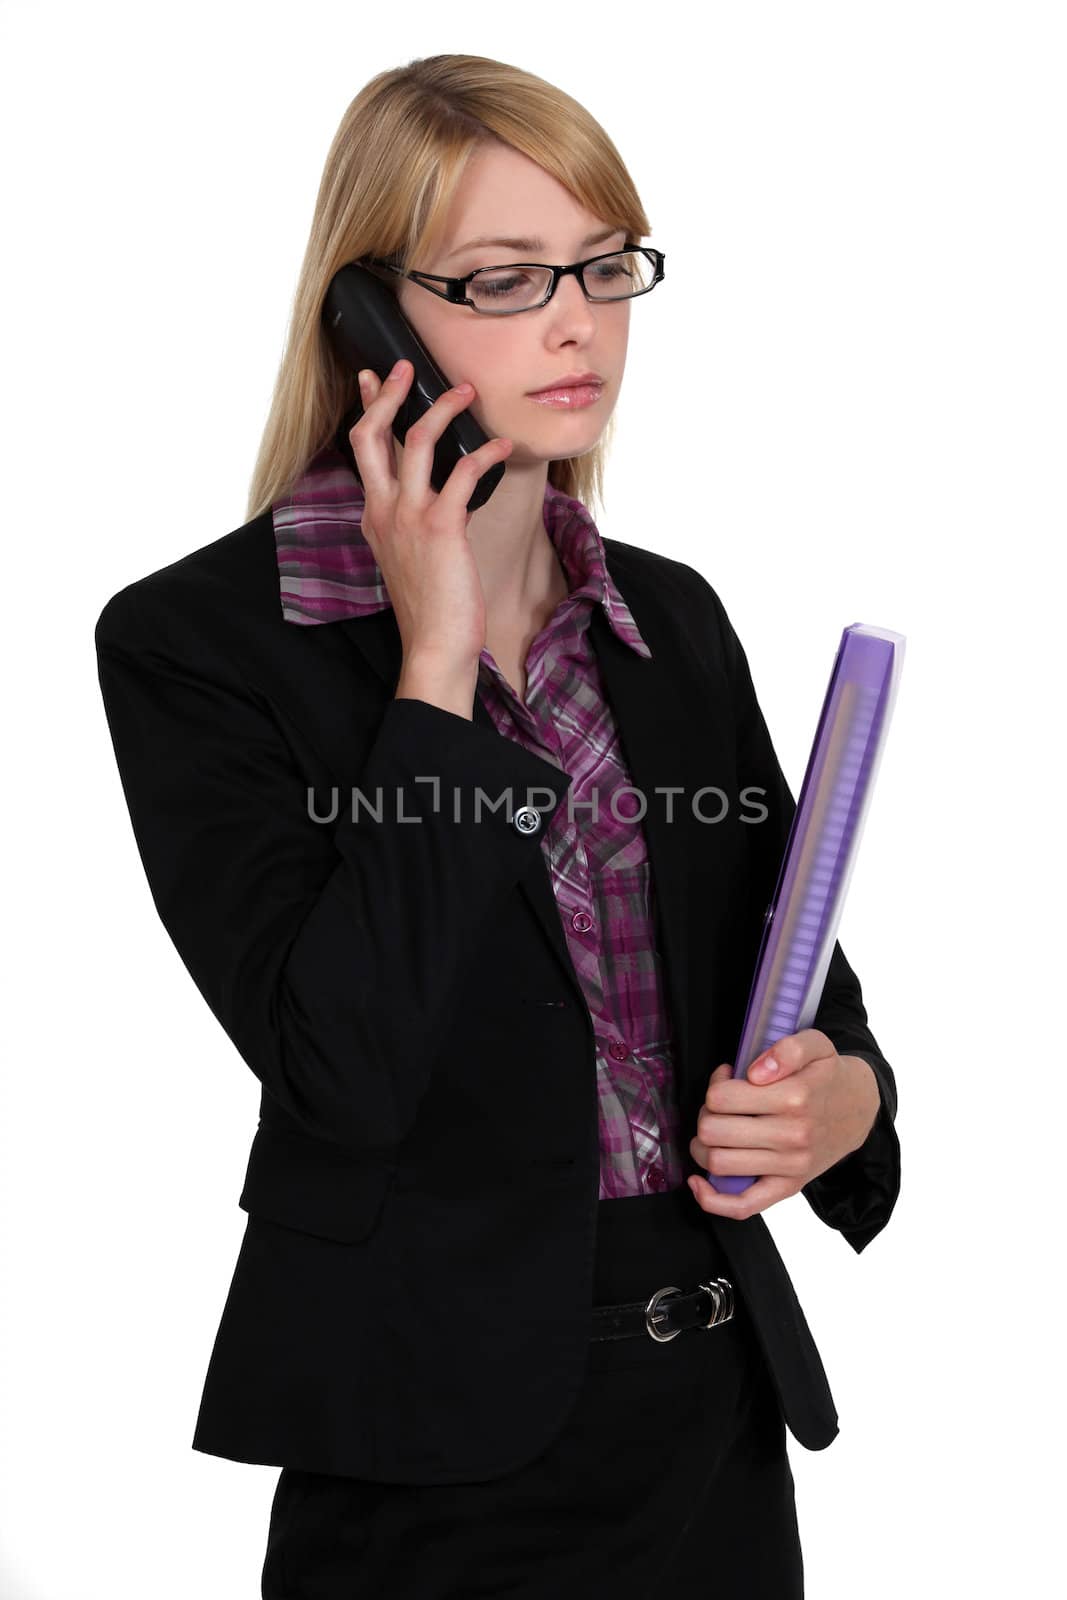 Employee listening to message on her phone by phovoir